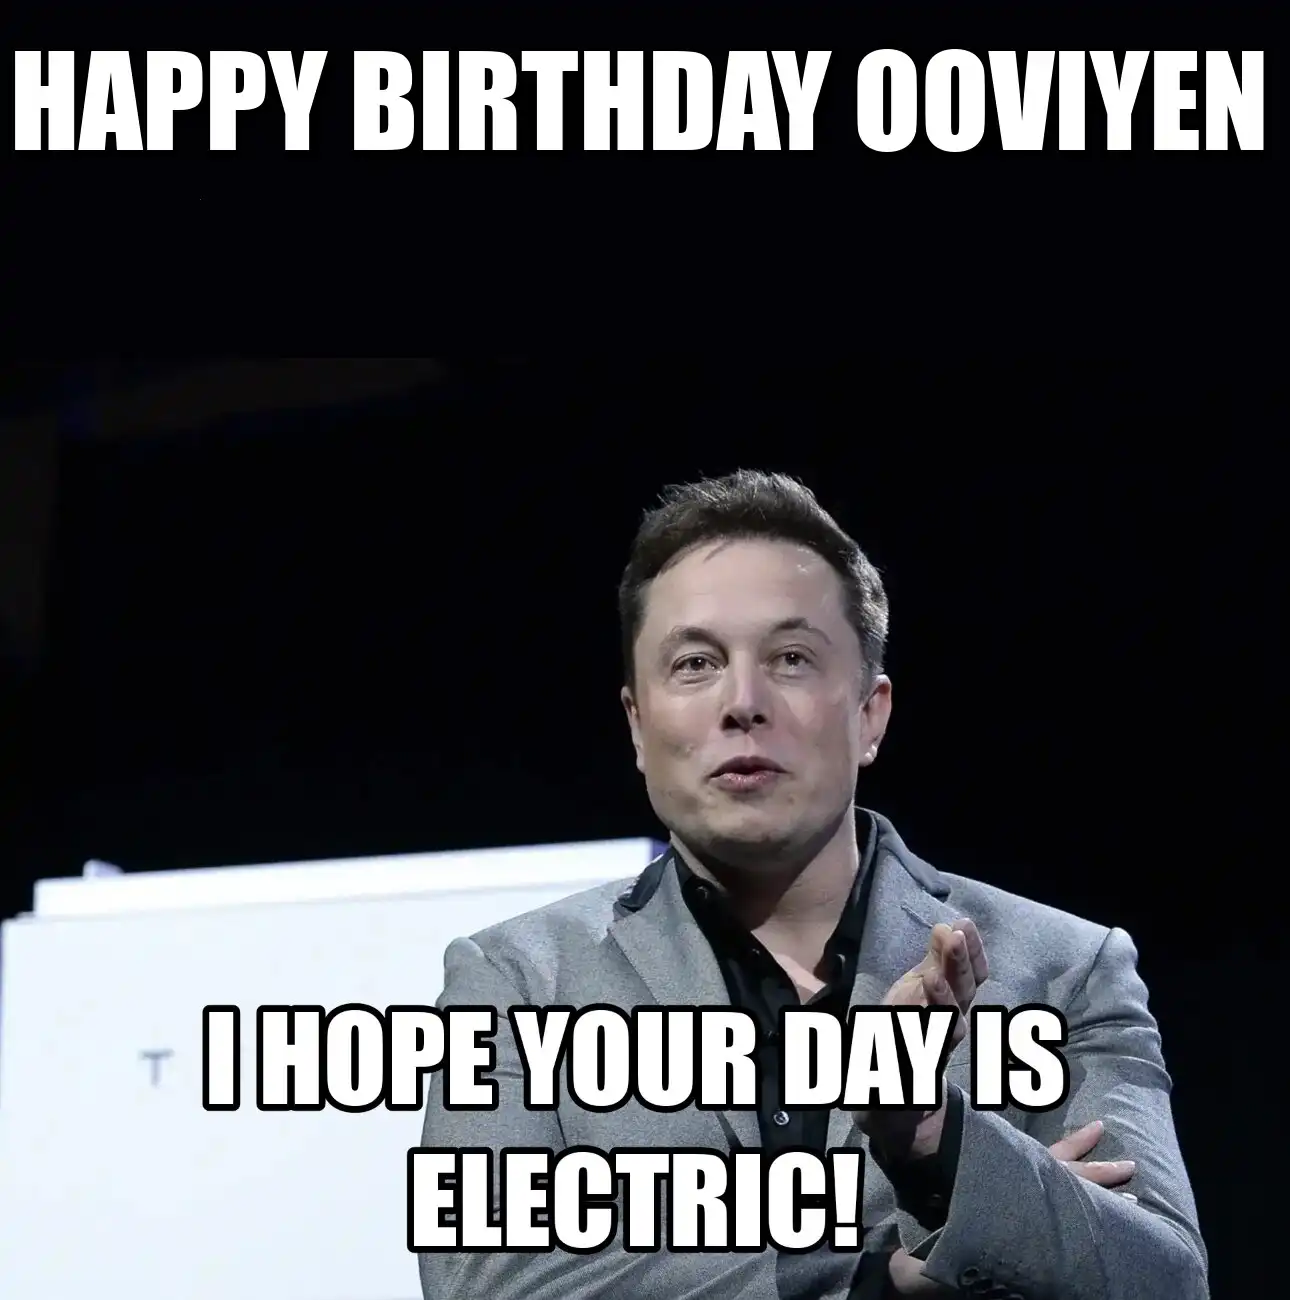 Happy Birthday Ooviyen I Hope Your Day Is Electric Meme